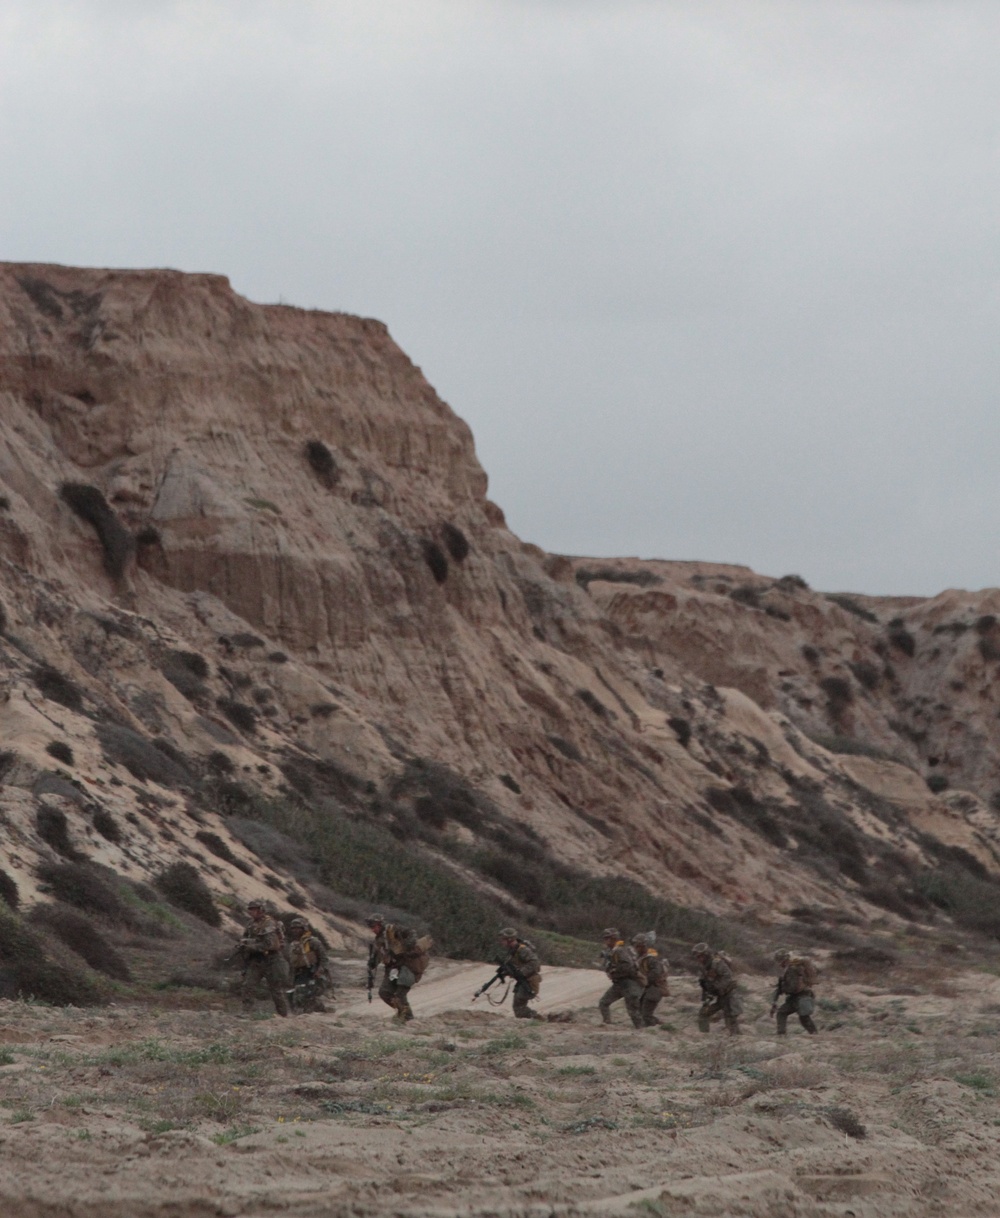 Geronimo Battalion prepares for pivot to Pacific during weeklong exercise